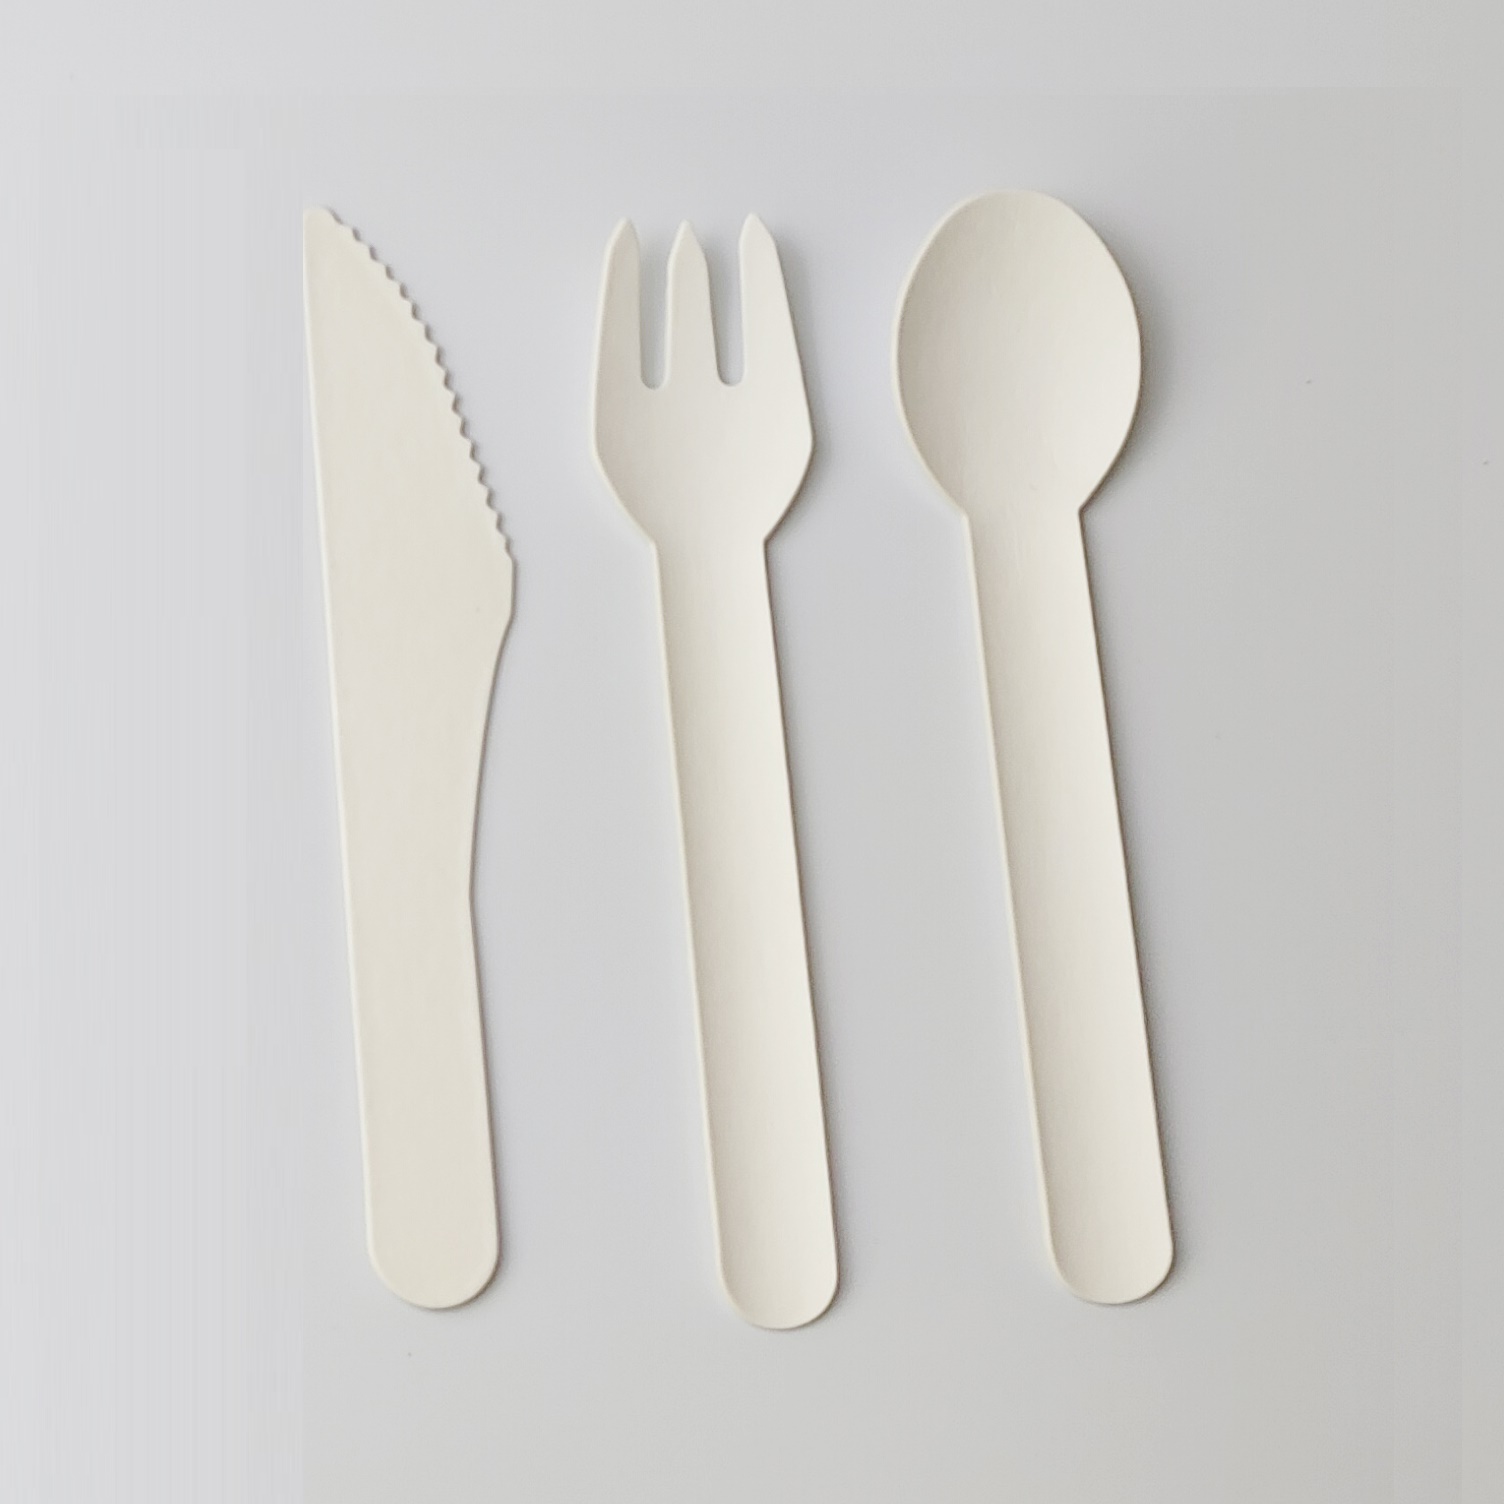 Macao will ban the import of non-biodegradable disposable plastic knives, forks and spoons from 2023